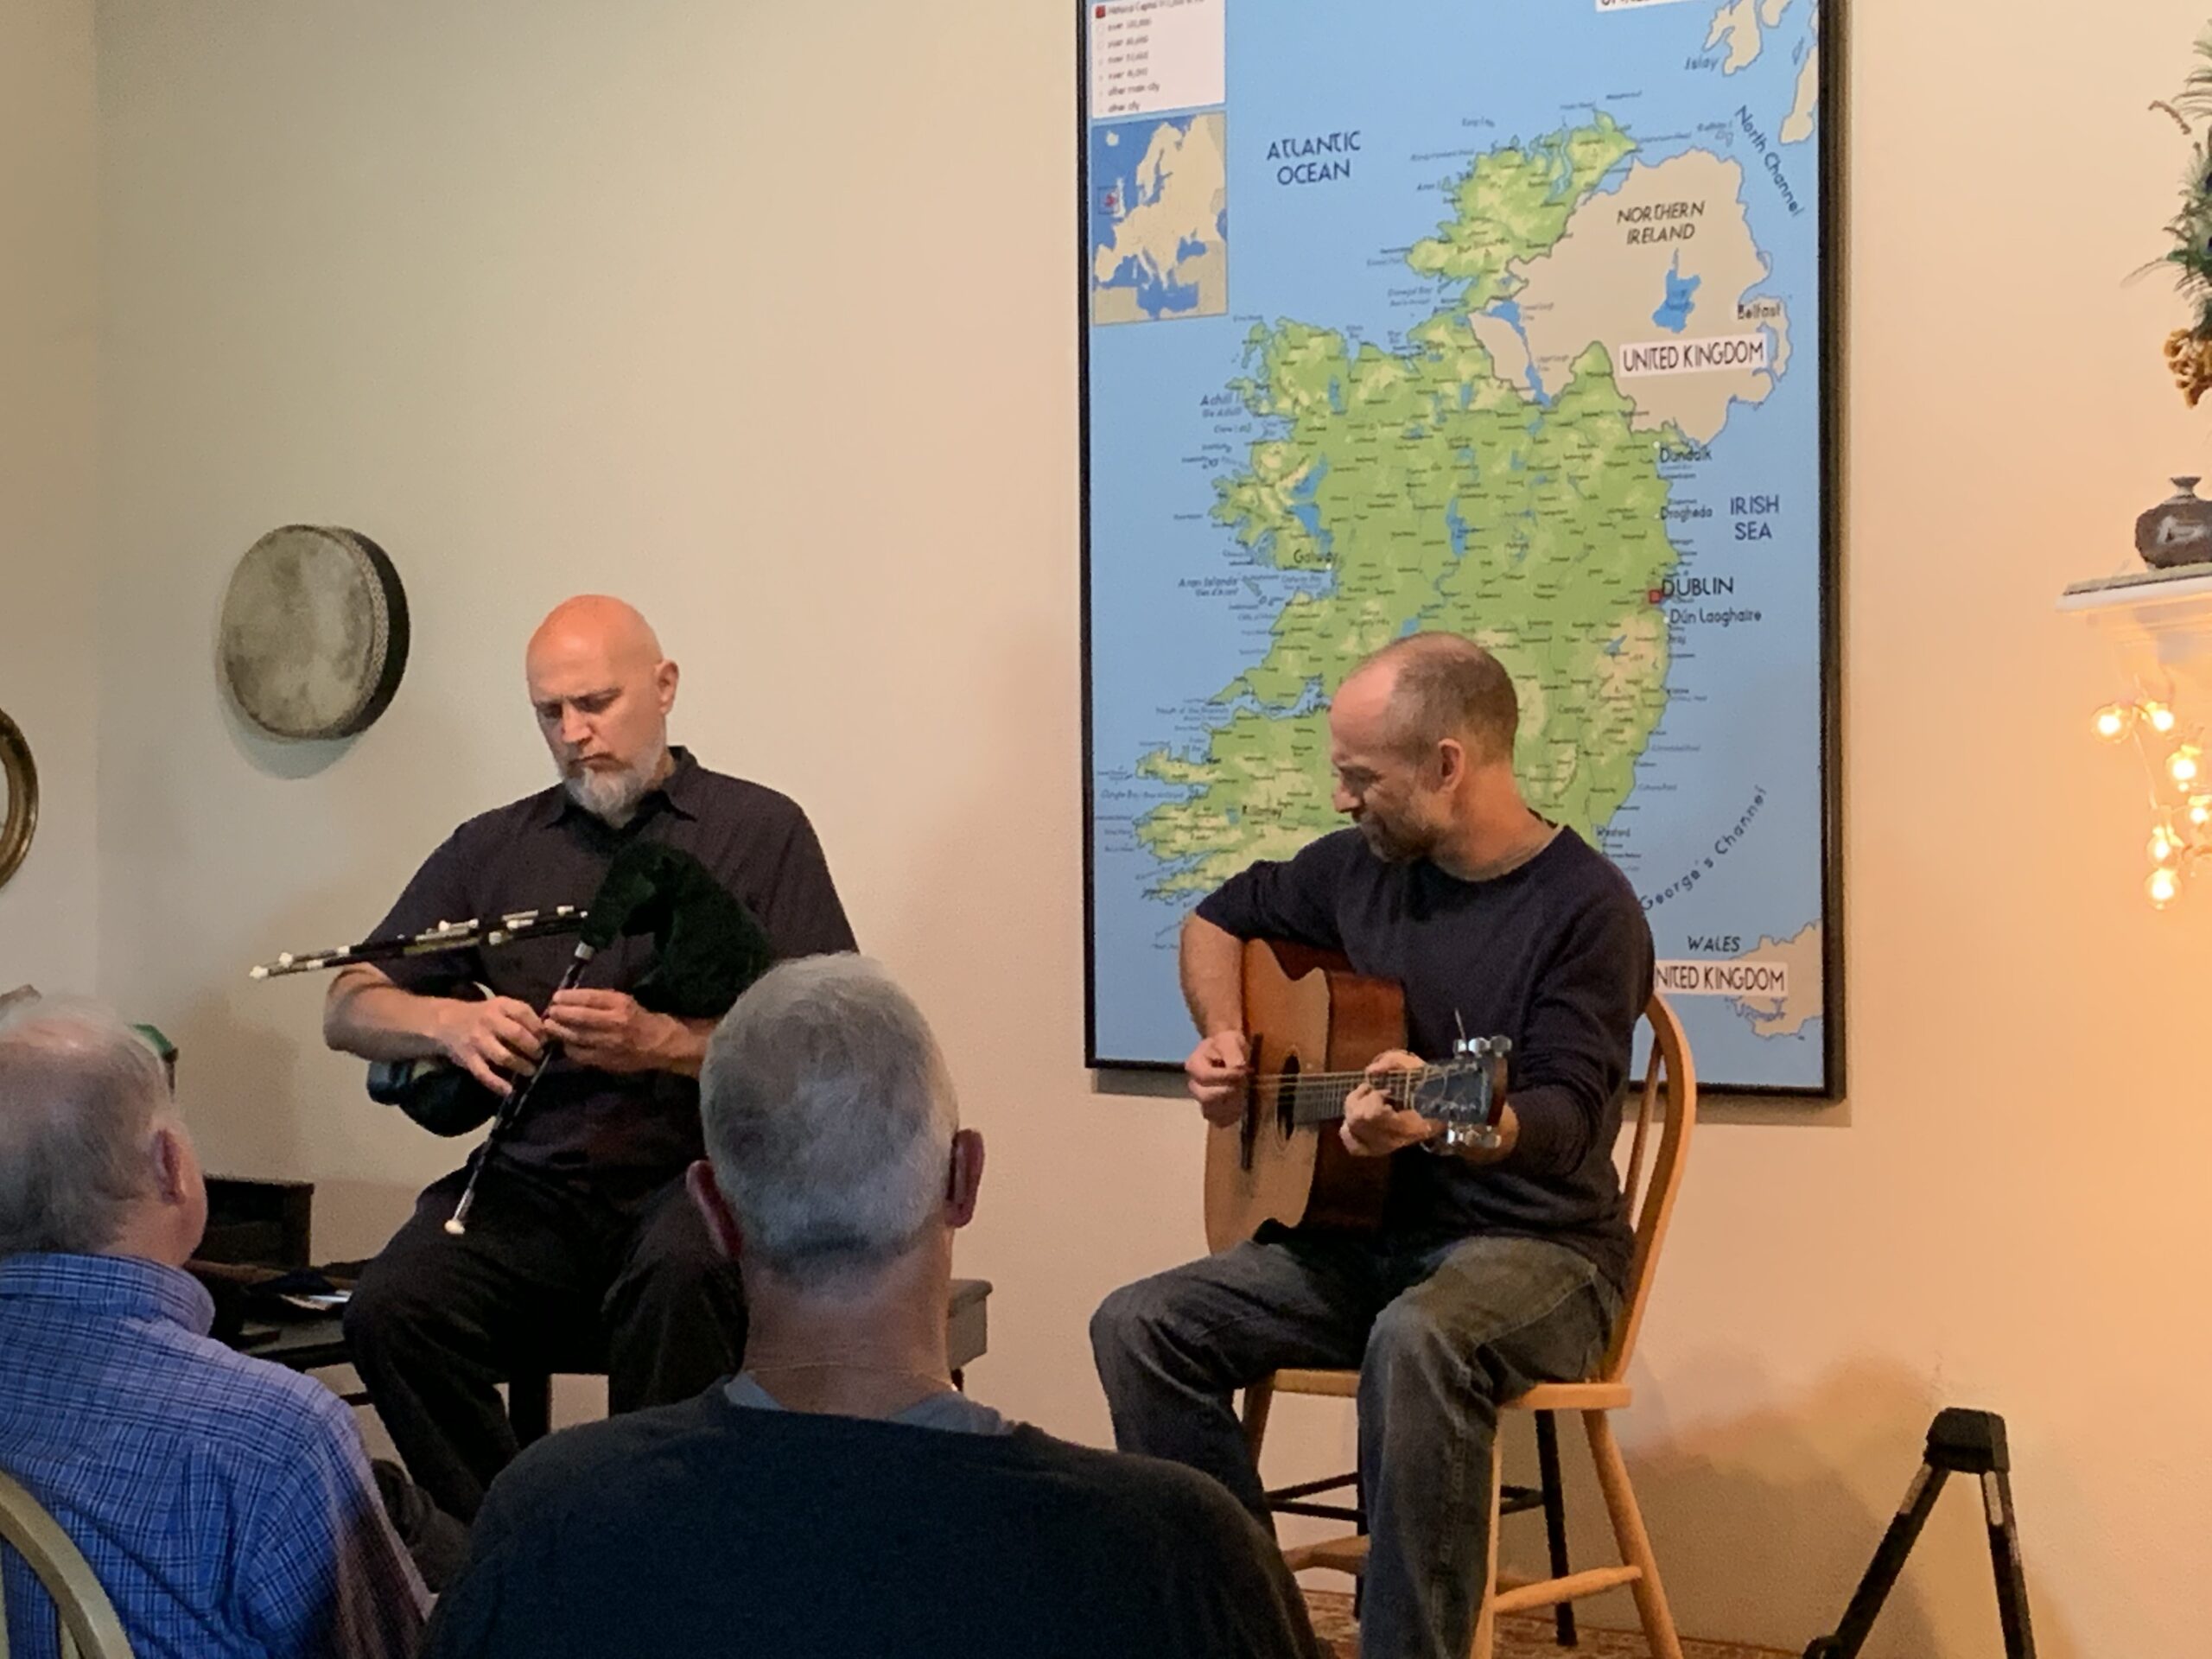 Dick Hensold & Patsy O'Brien, Auburn House Concerts, 2019.